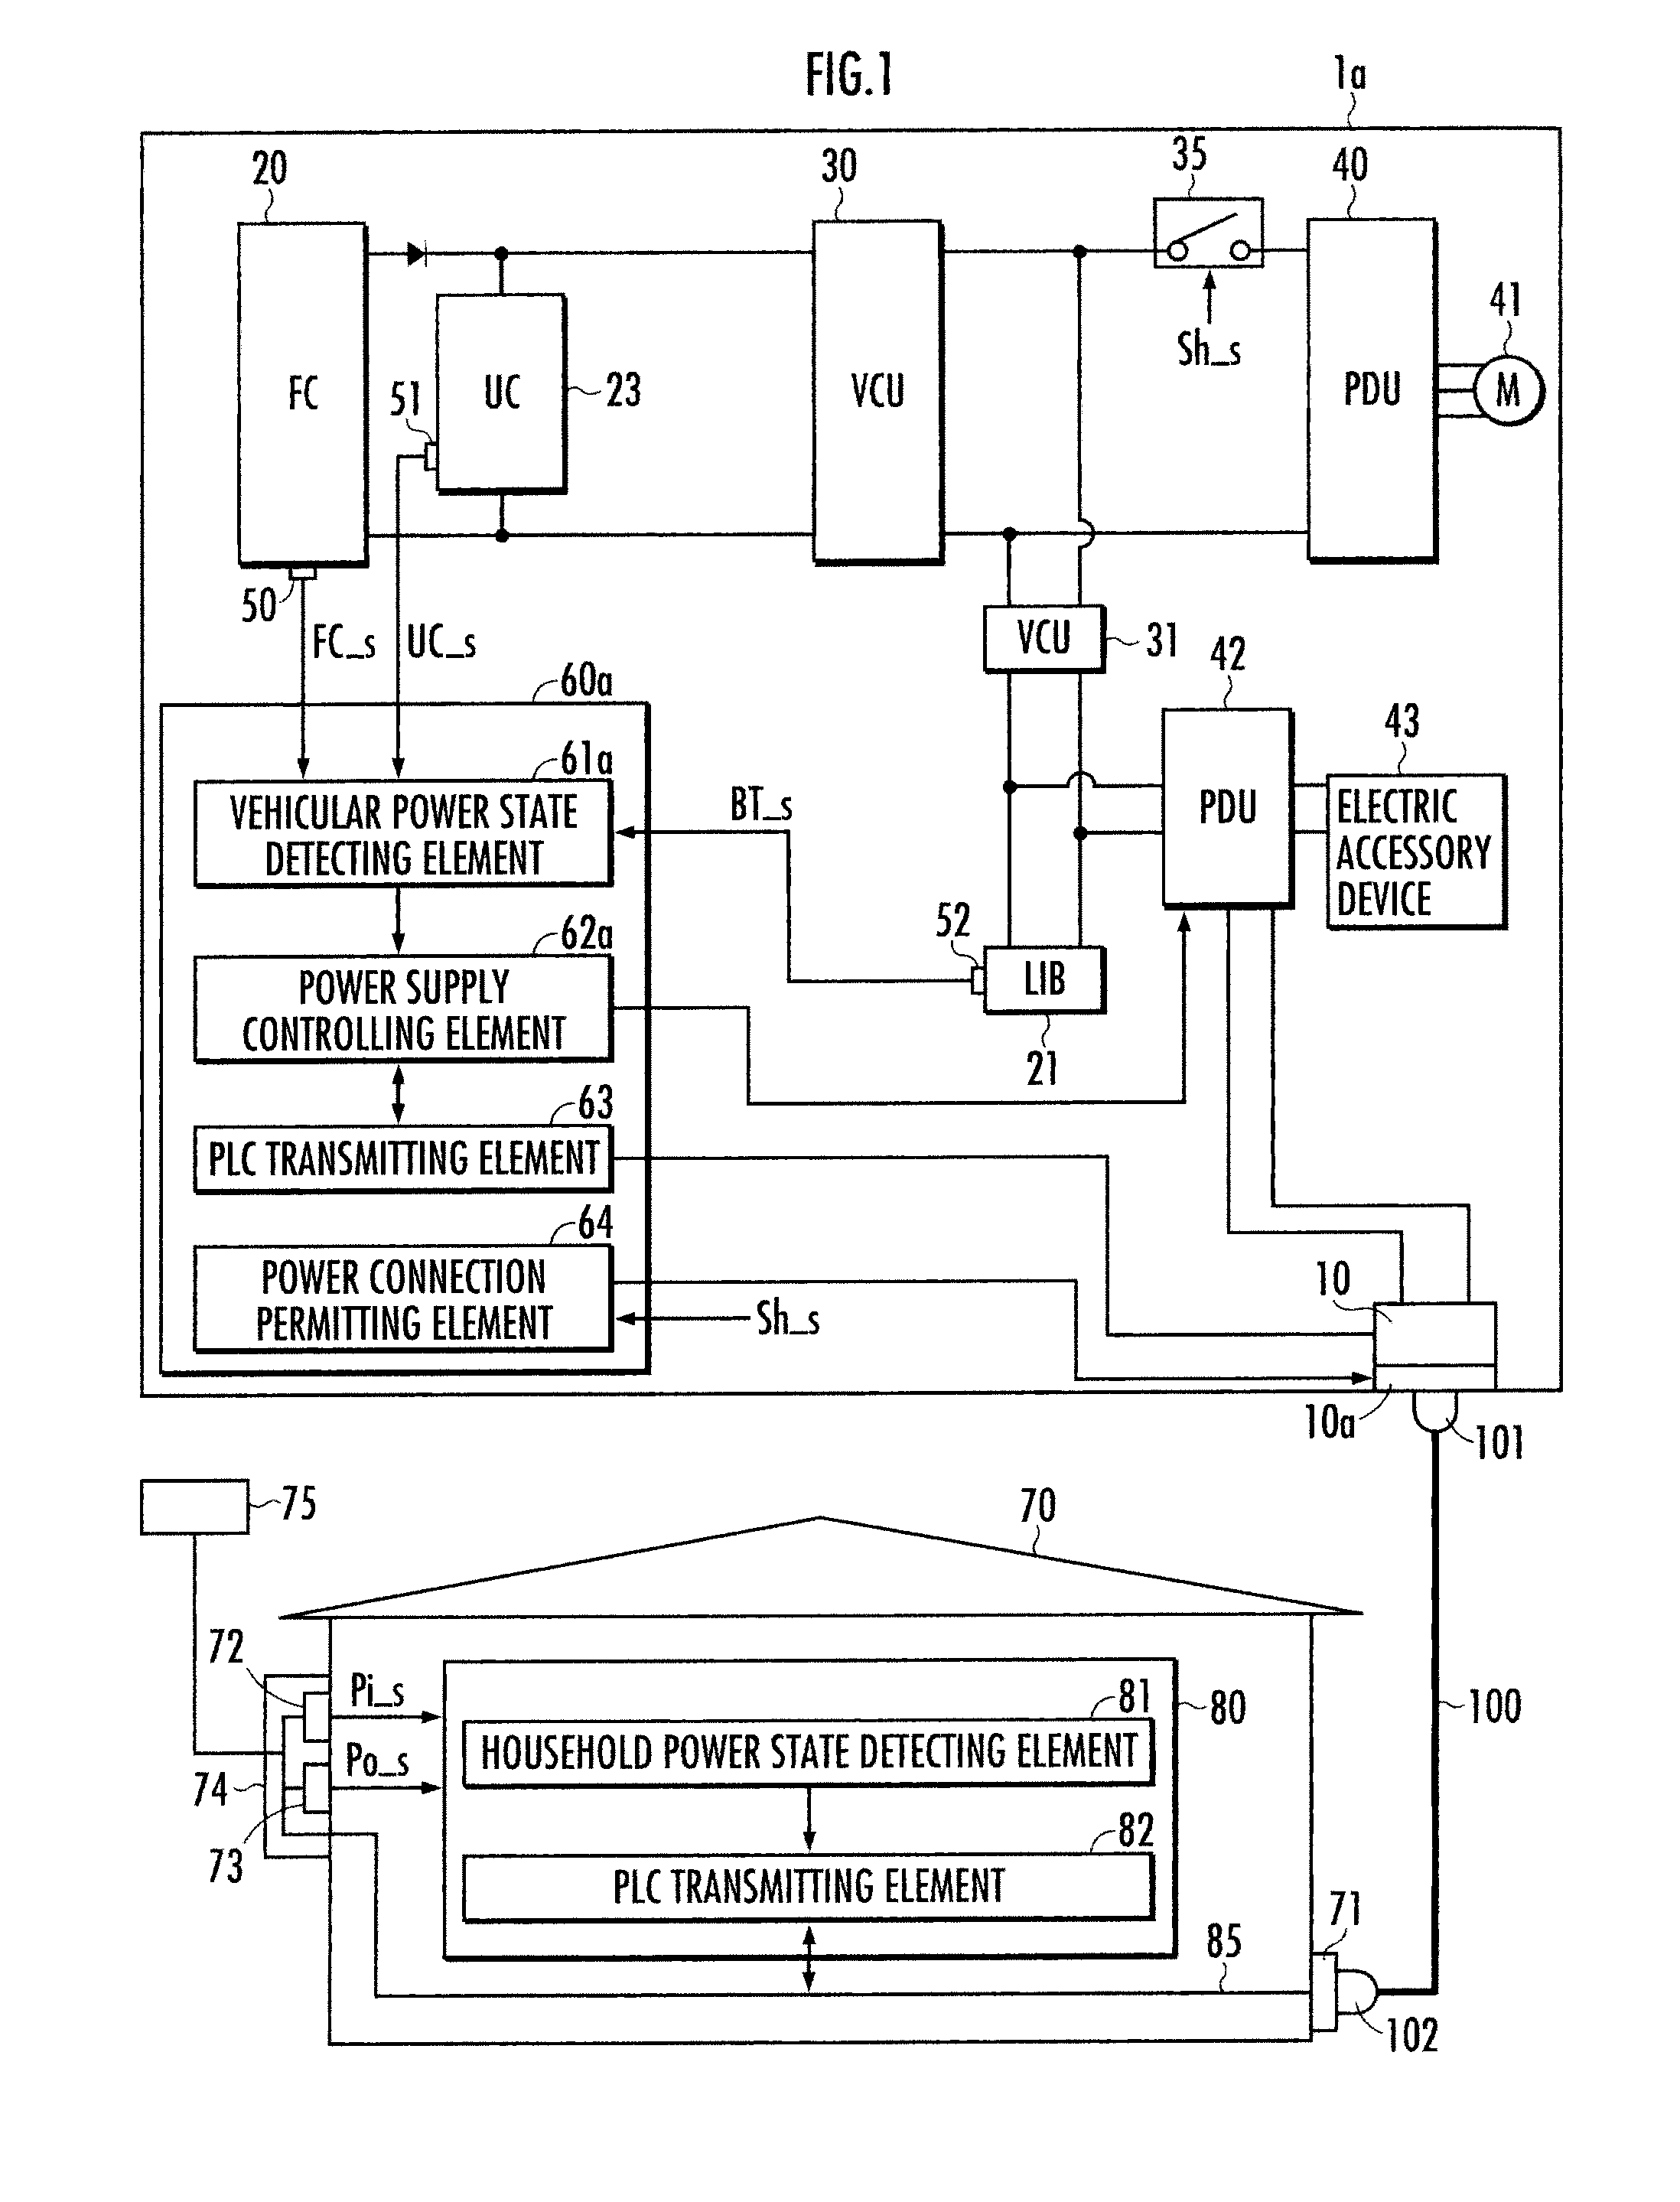 Electric power supply system between vehicle and house